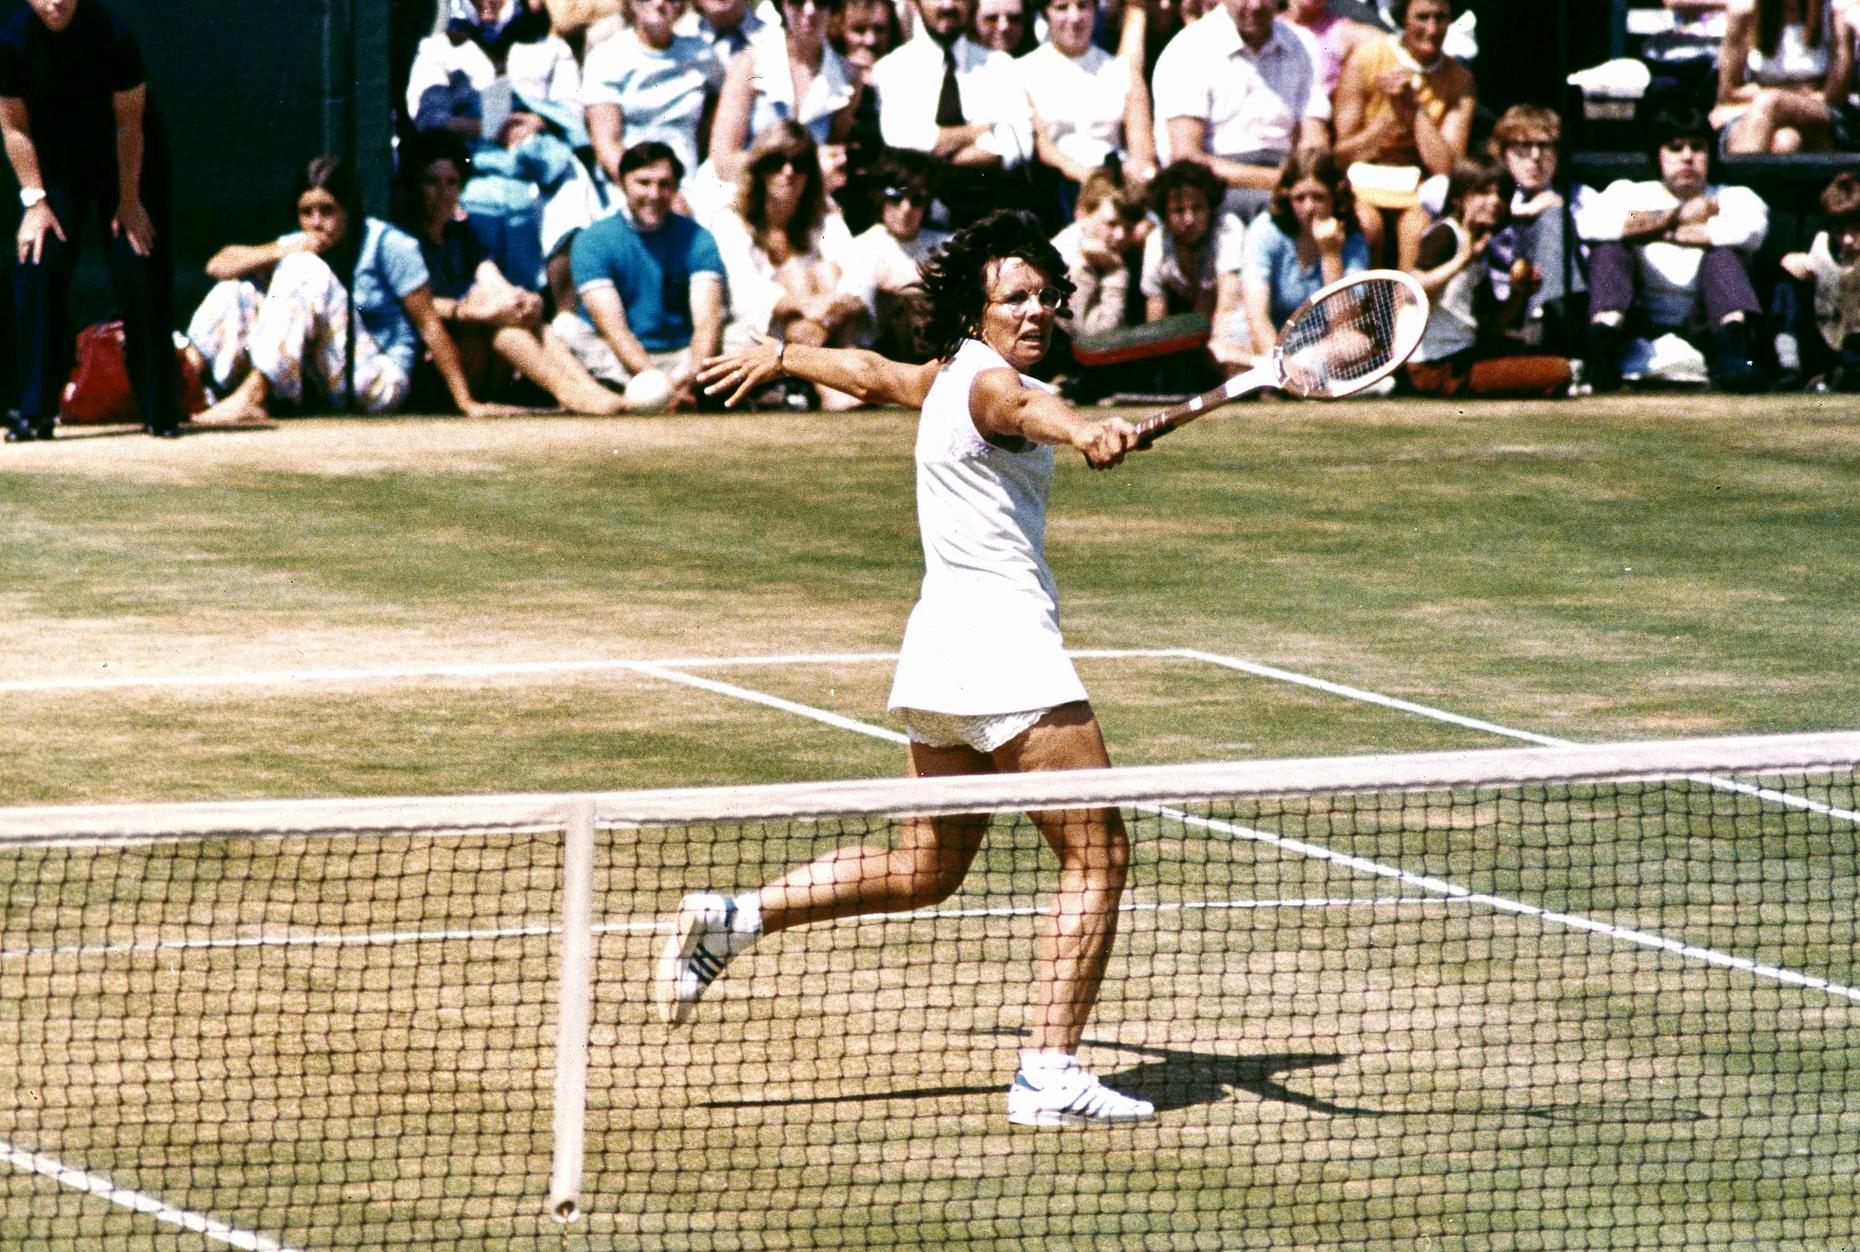 Four decades after the Battle of the Sexes, the fight for equality goes on, Tennis